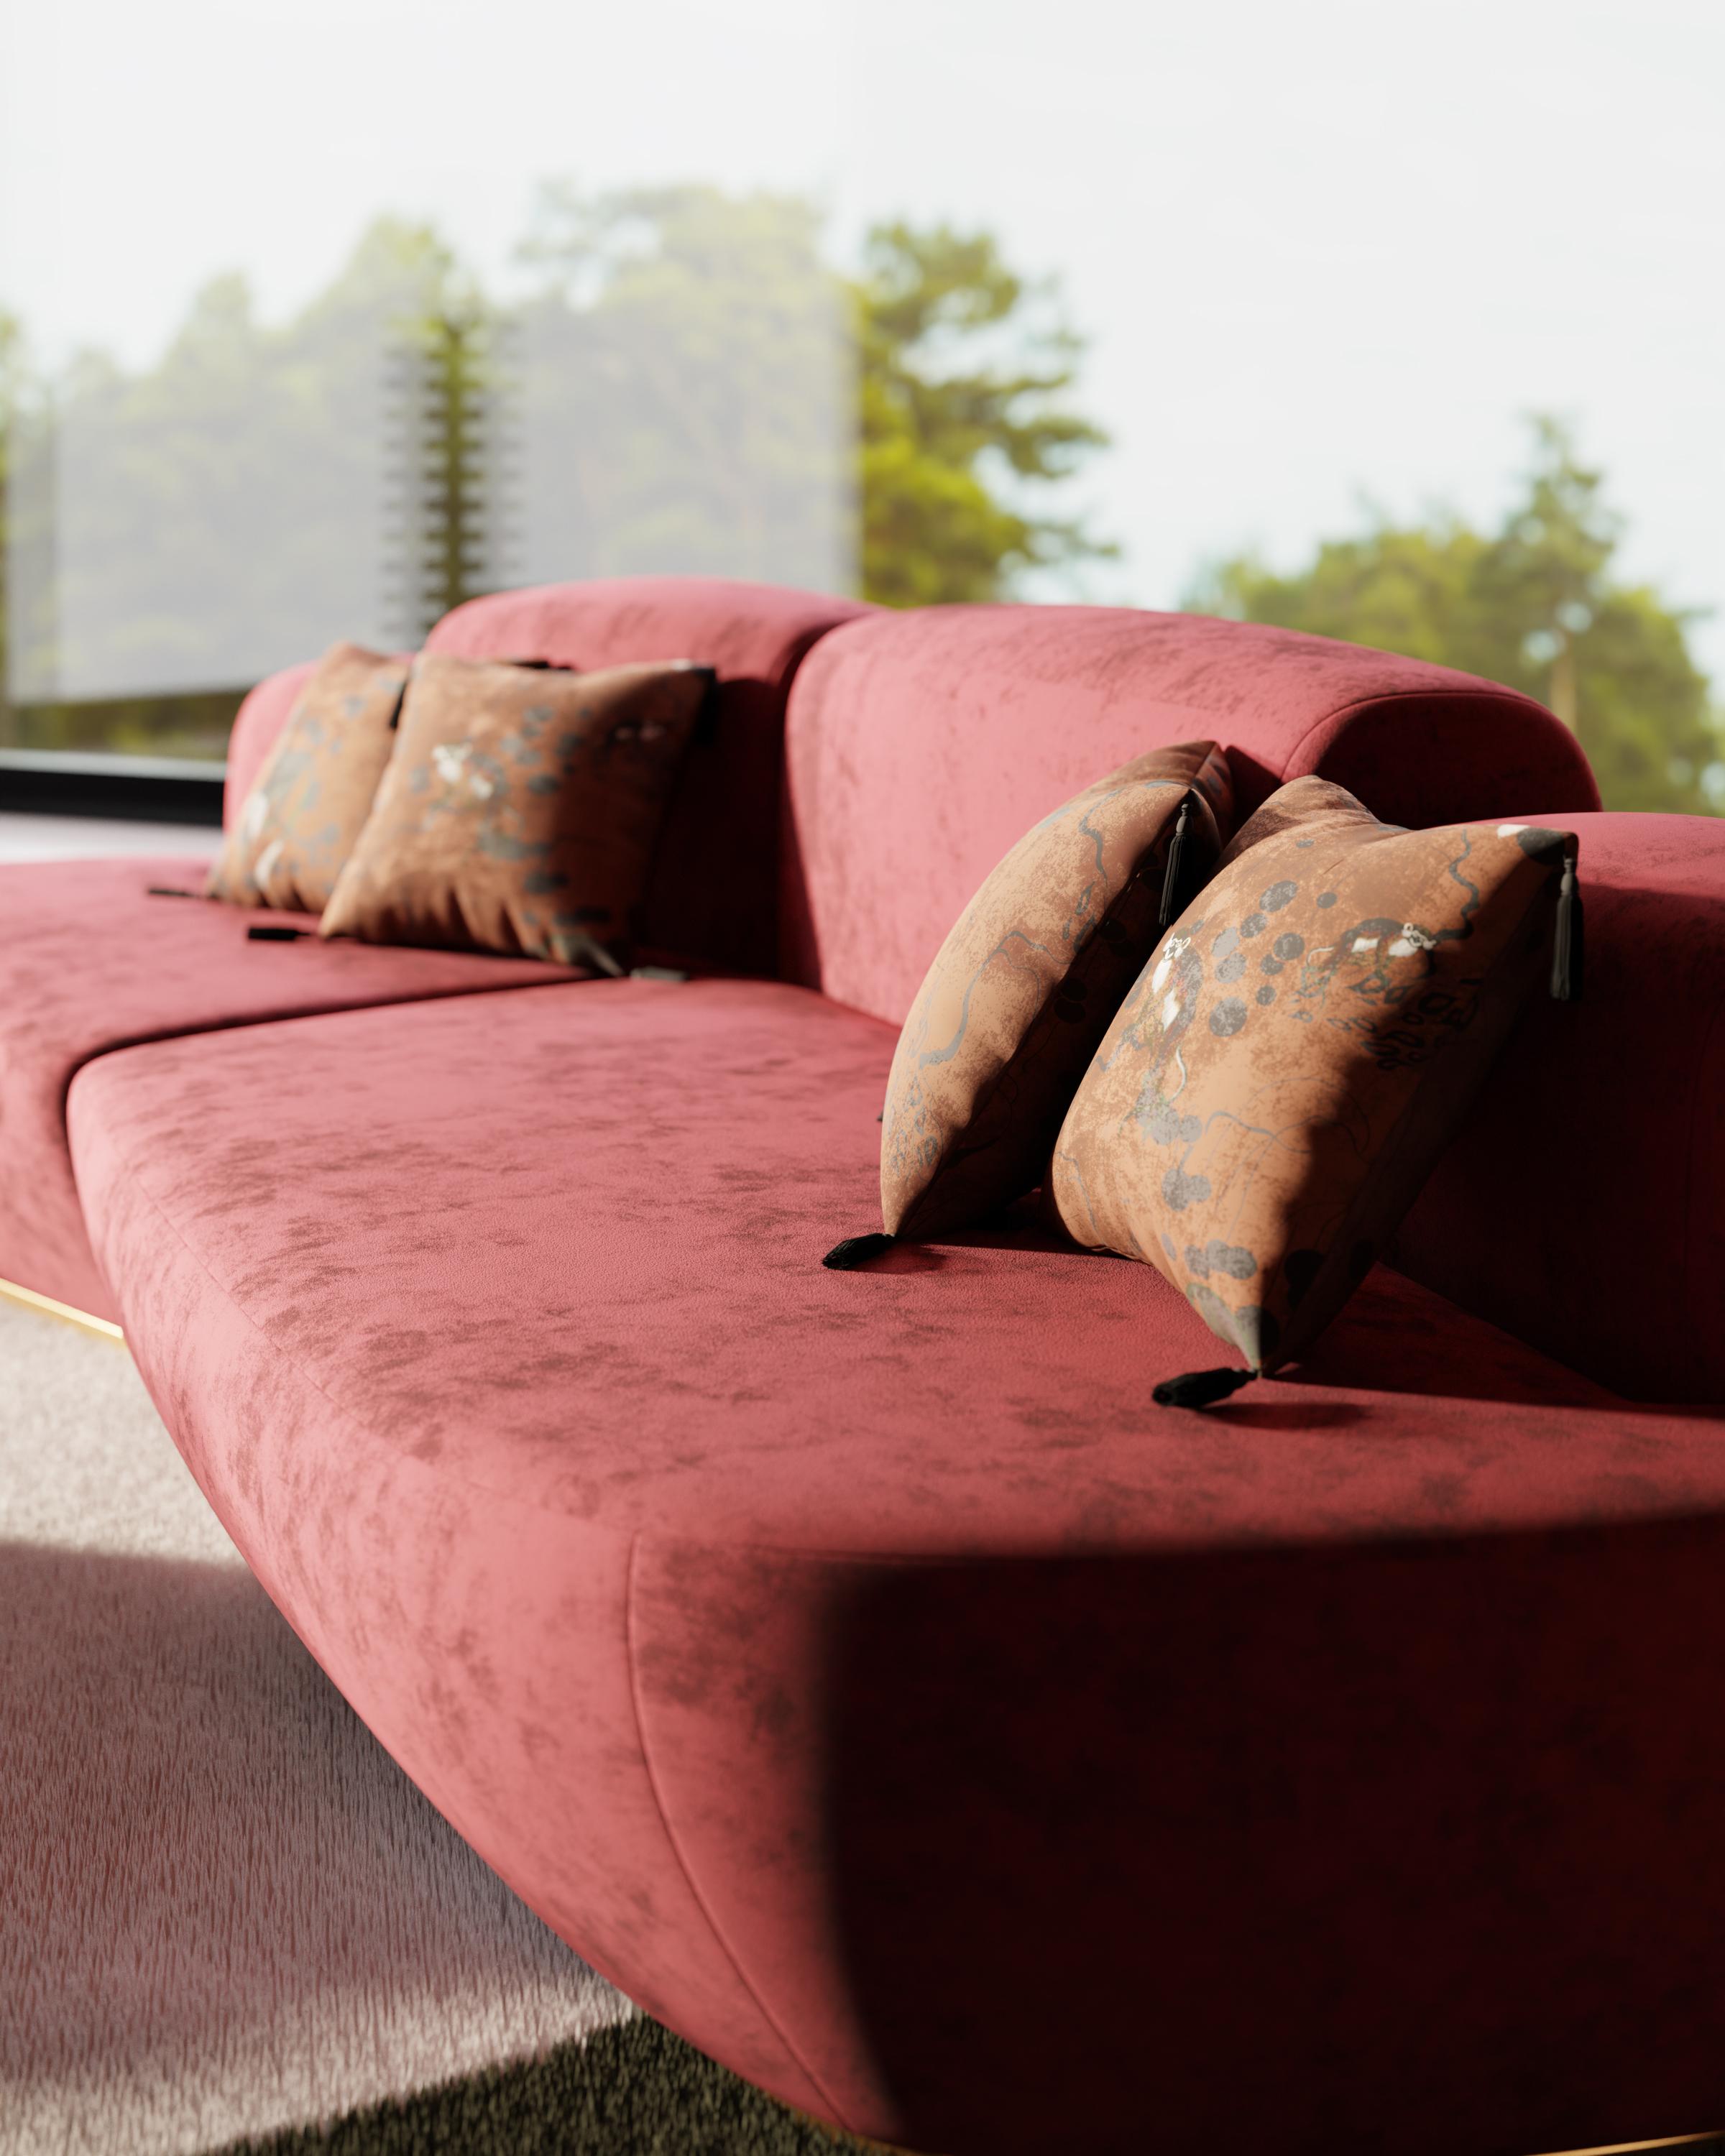 Contemporary 21st Century Modern Curved Sofa with Chaise Longue in Dark Red Velvet  For Sale